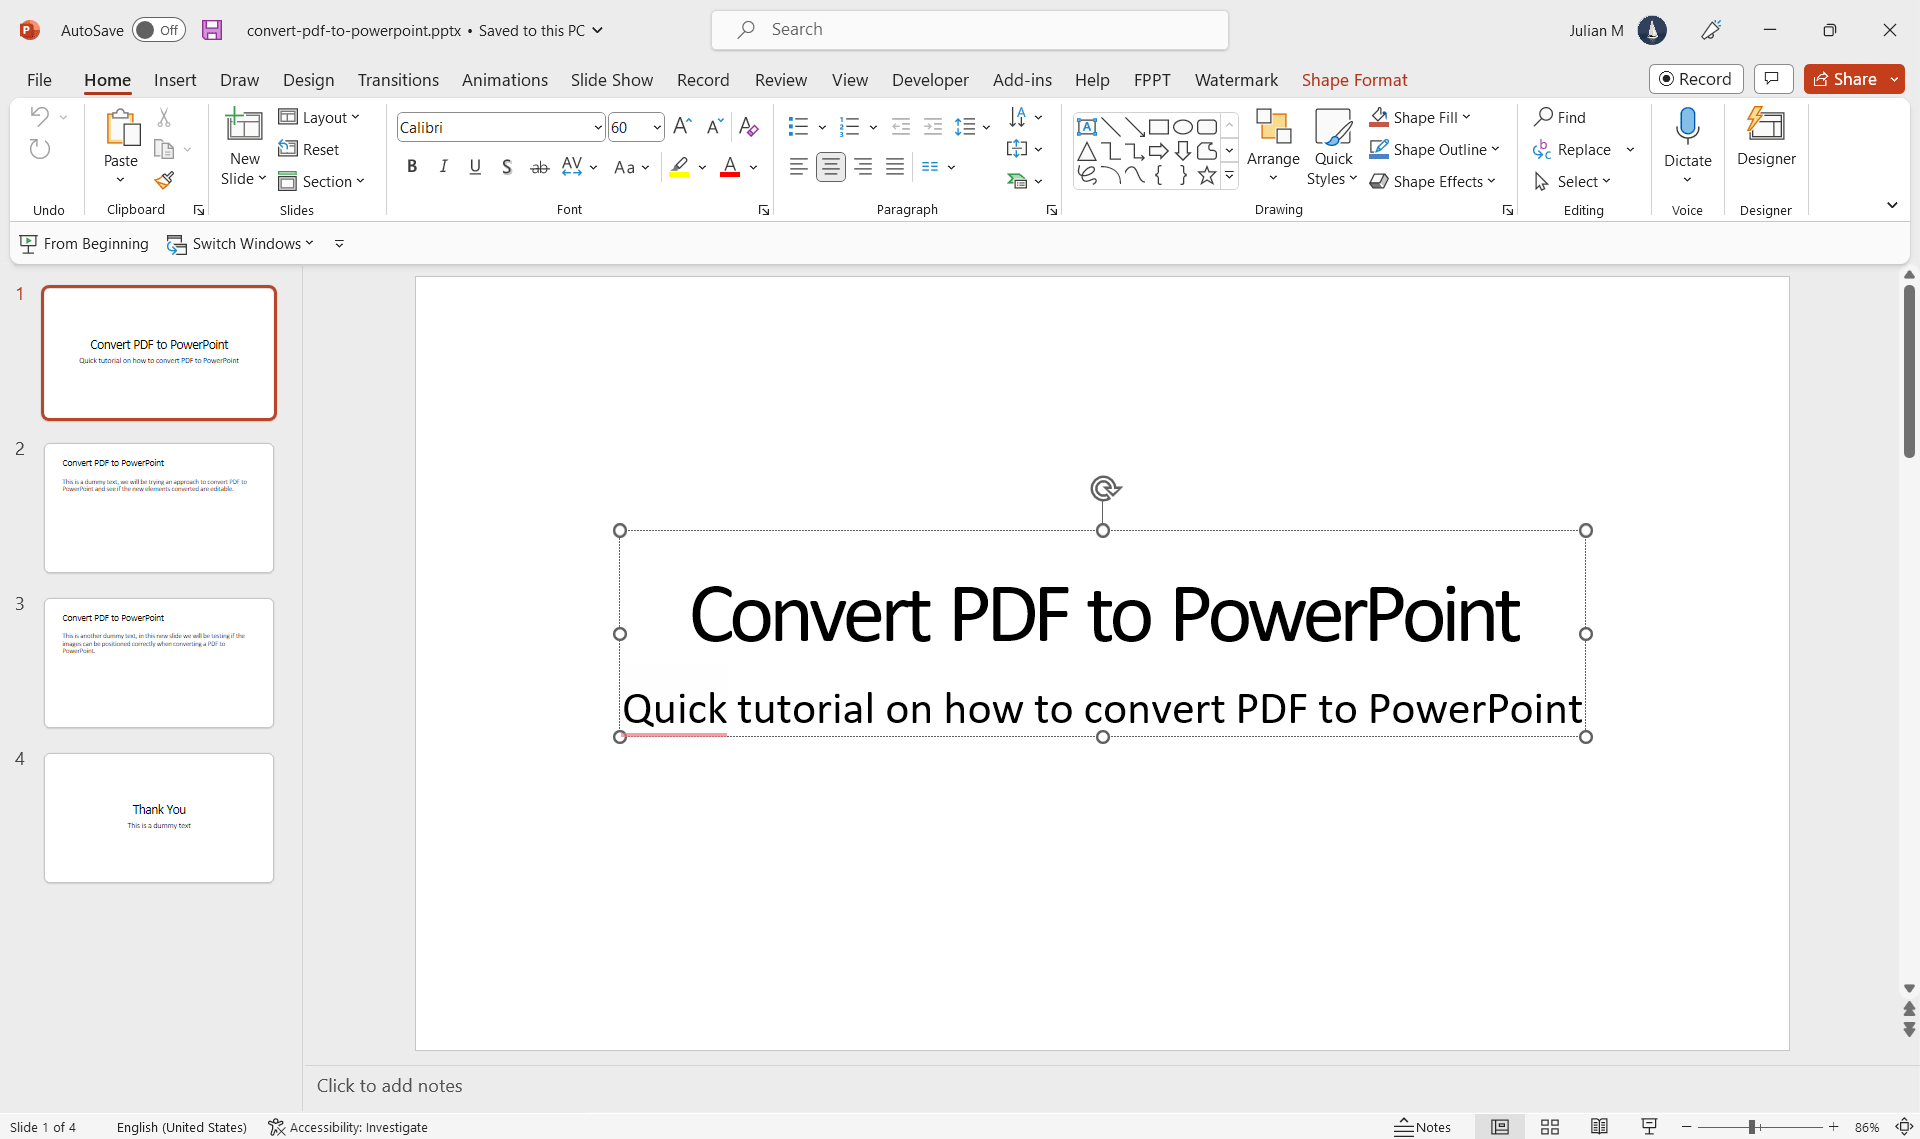 Example after converting PDF to PowerPoint